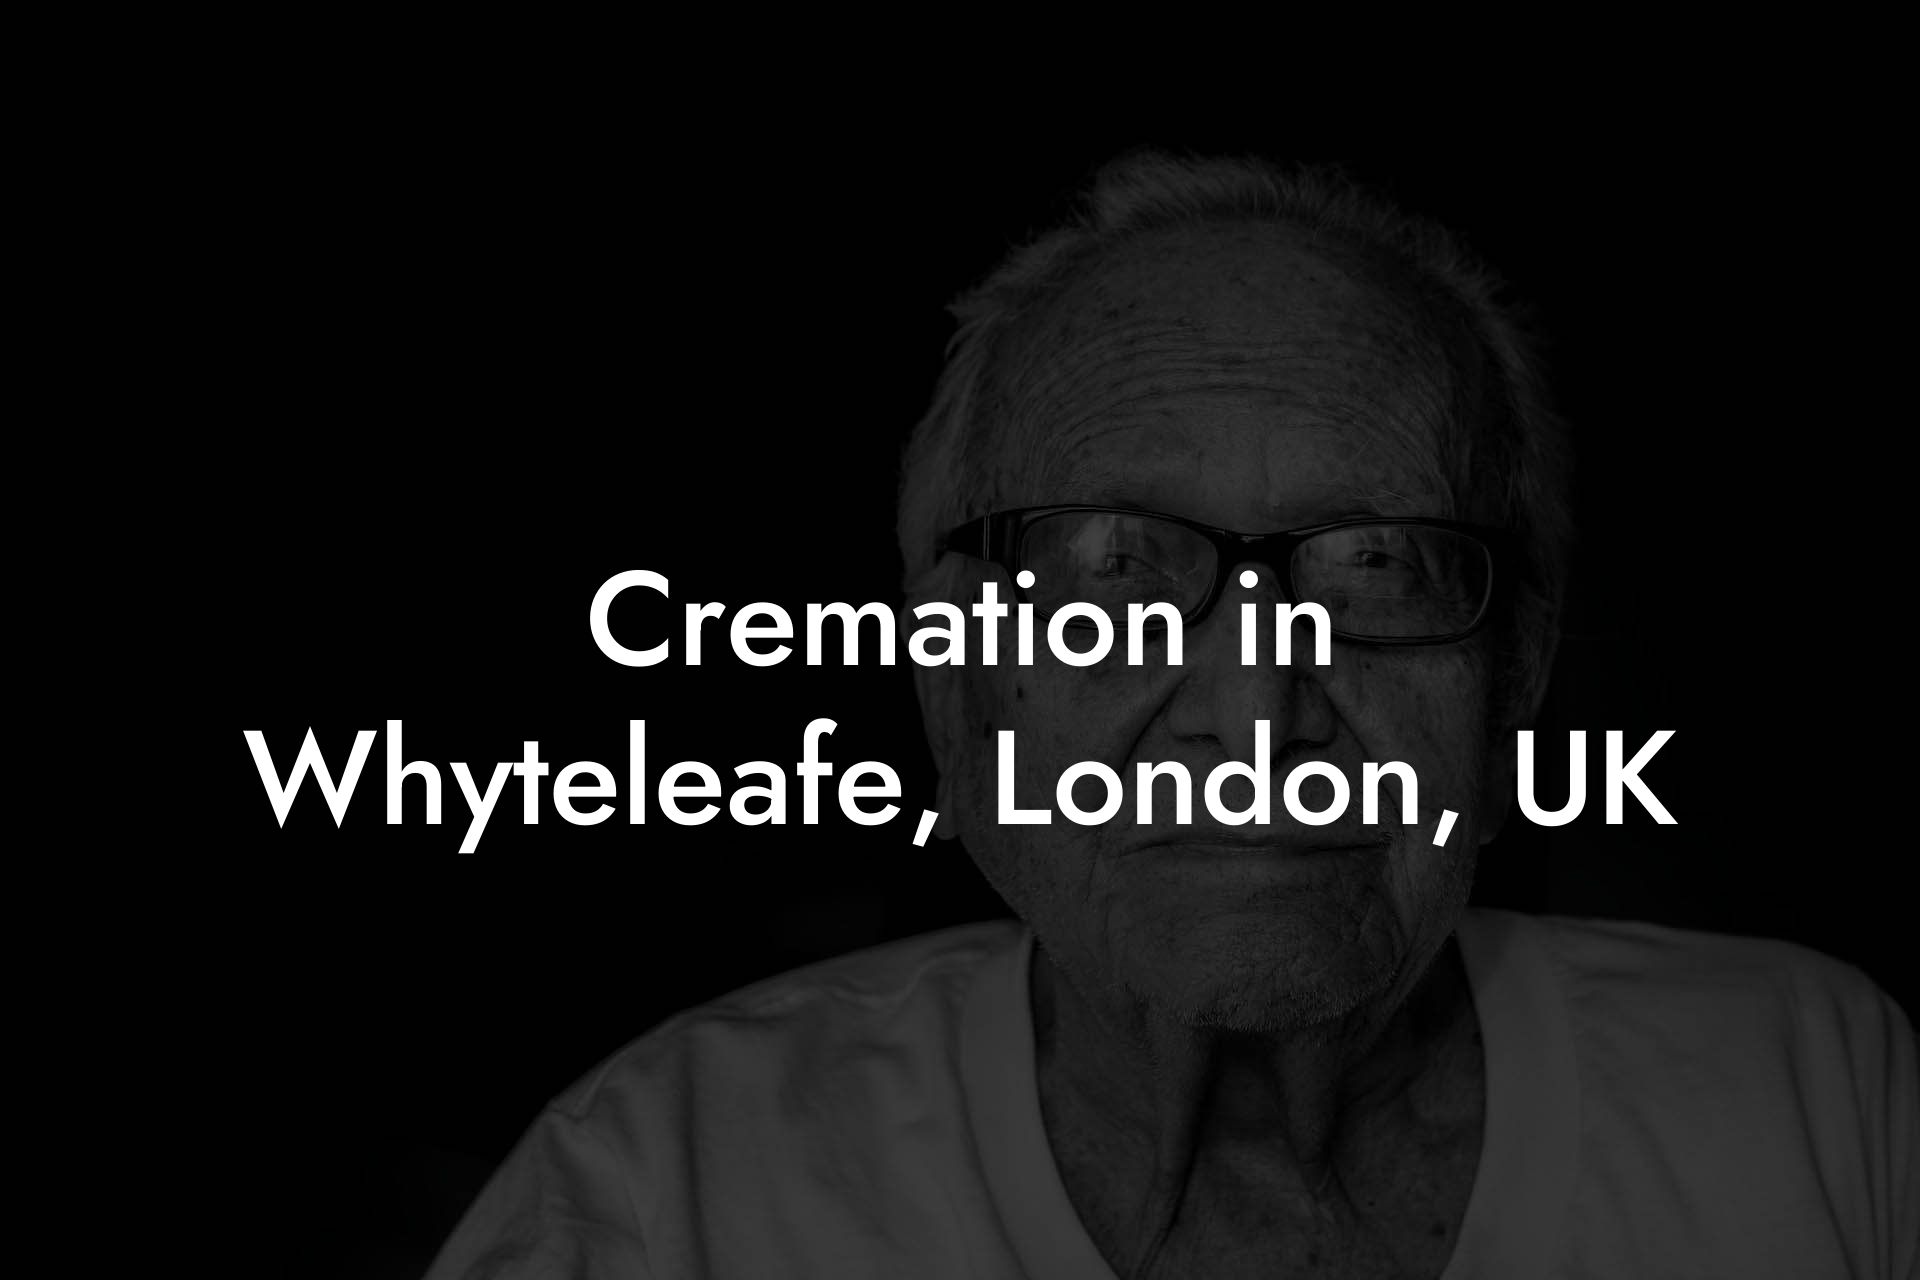 Cremation in Whyteleafe, London, UK